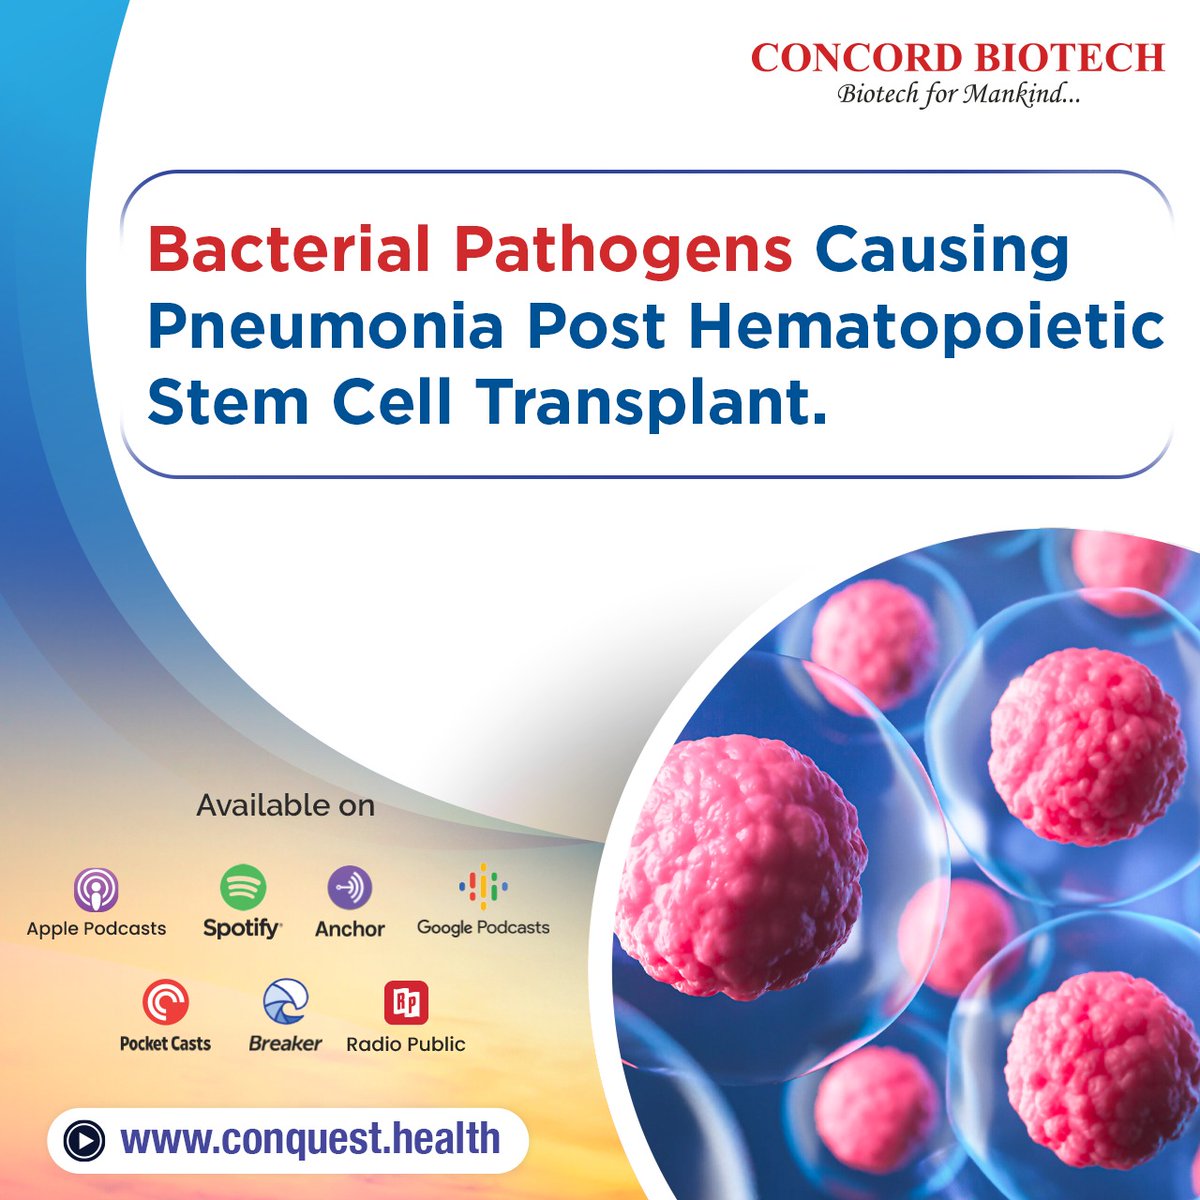 Join us on the #GoodHealthConquest podcast as we talk about the impact of #BacterialPathogens causing #pneumonia post #HematopoieticStemCellTransplant.

Listen now: spotifyanchor-web.app.link/e/gF262BHWoGb

#pulmonarycomplications #bacterialinfections #podcast #ConcordBiotech